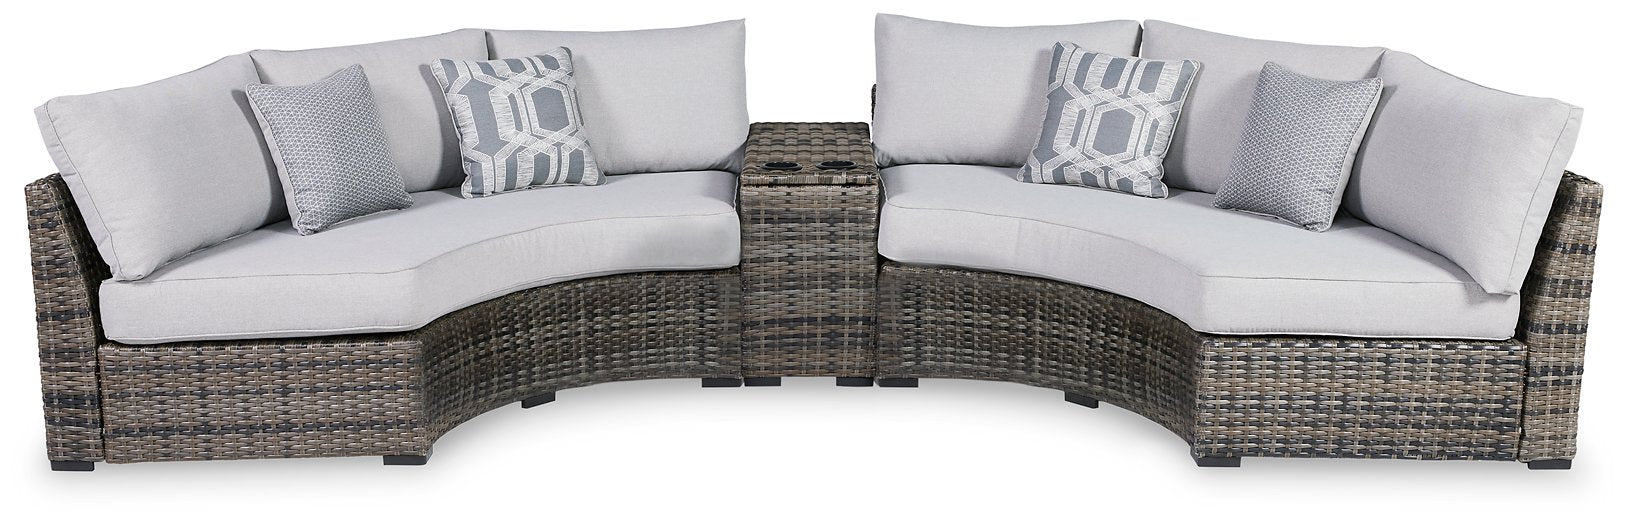 Harbor Court Outdoor Sectional - Half Price Furniture